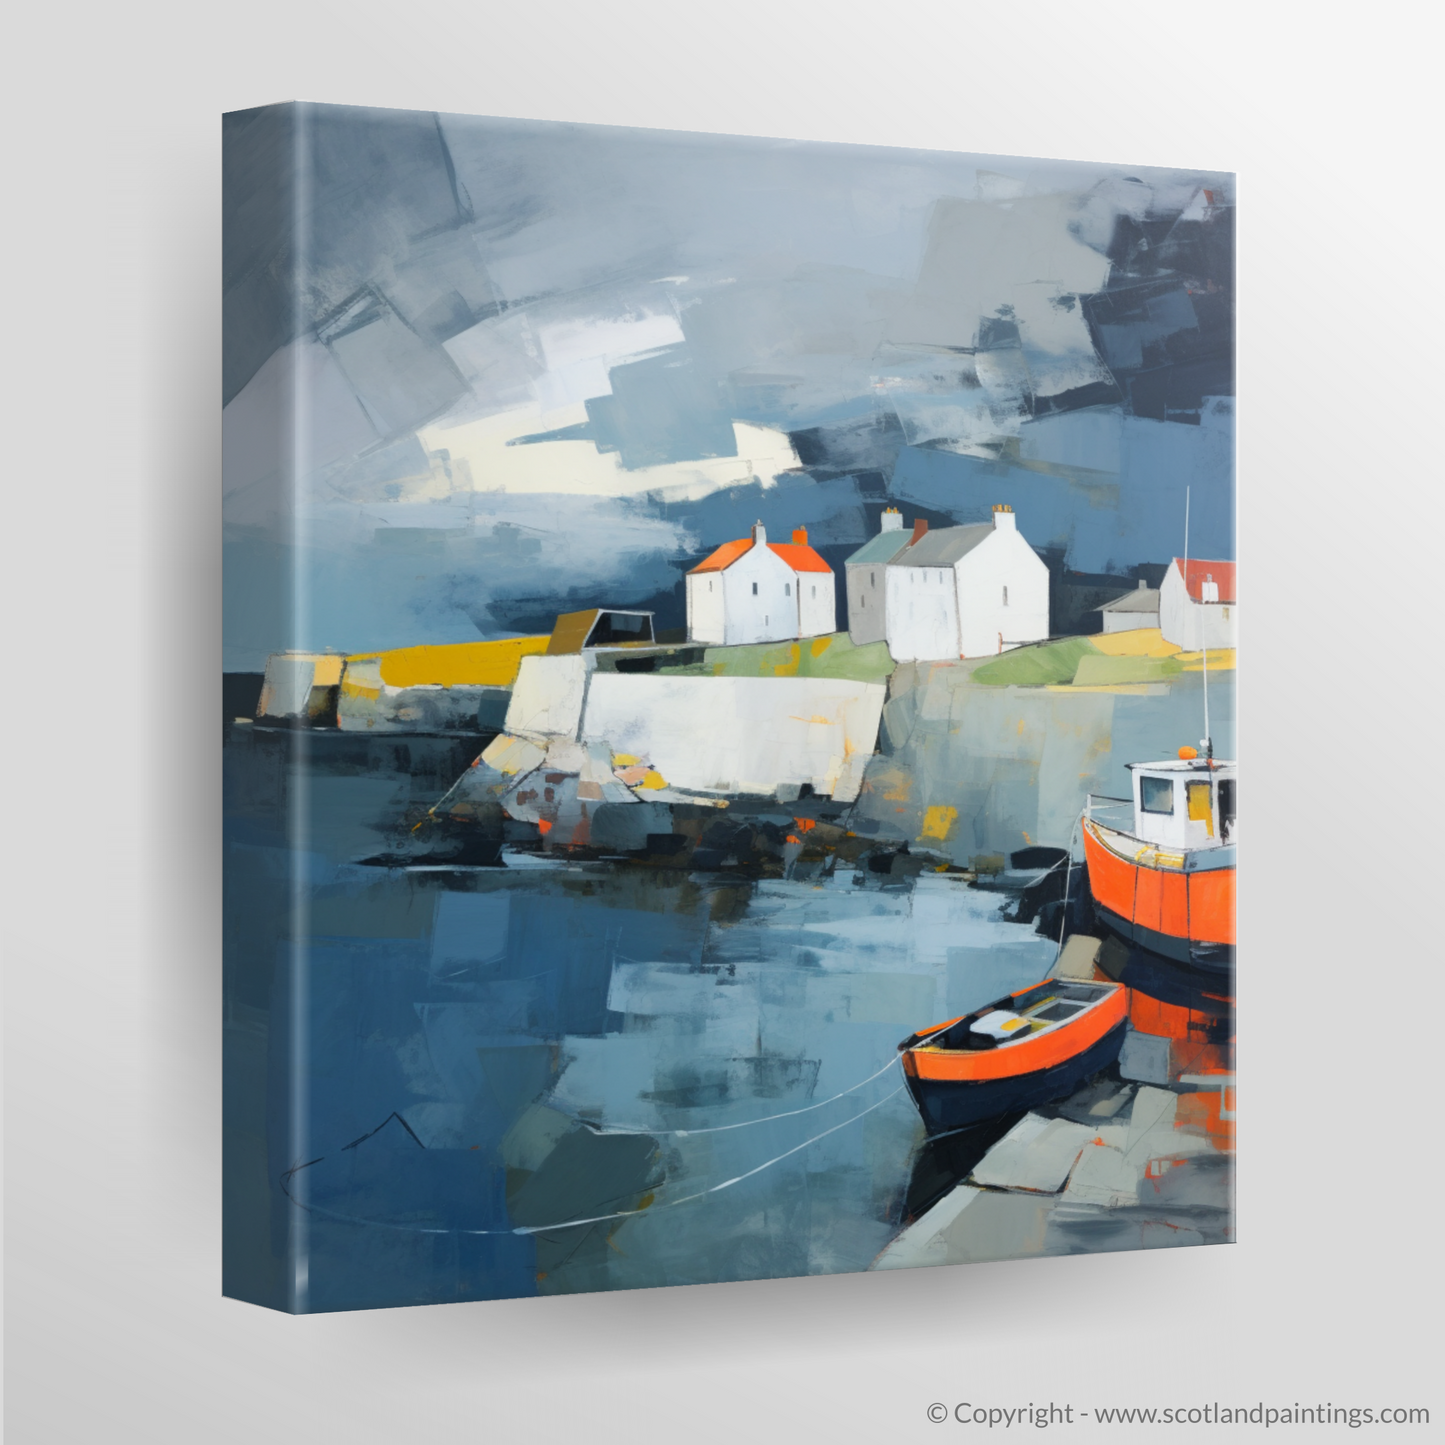 Storm Over Portsoy: A Dance of Wind and Water